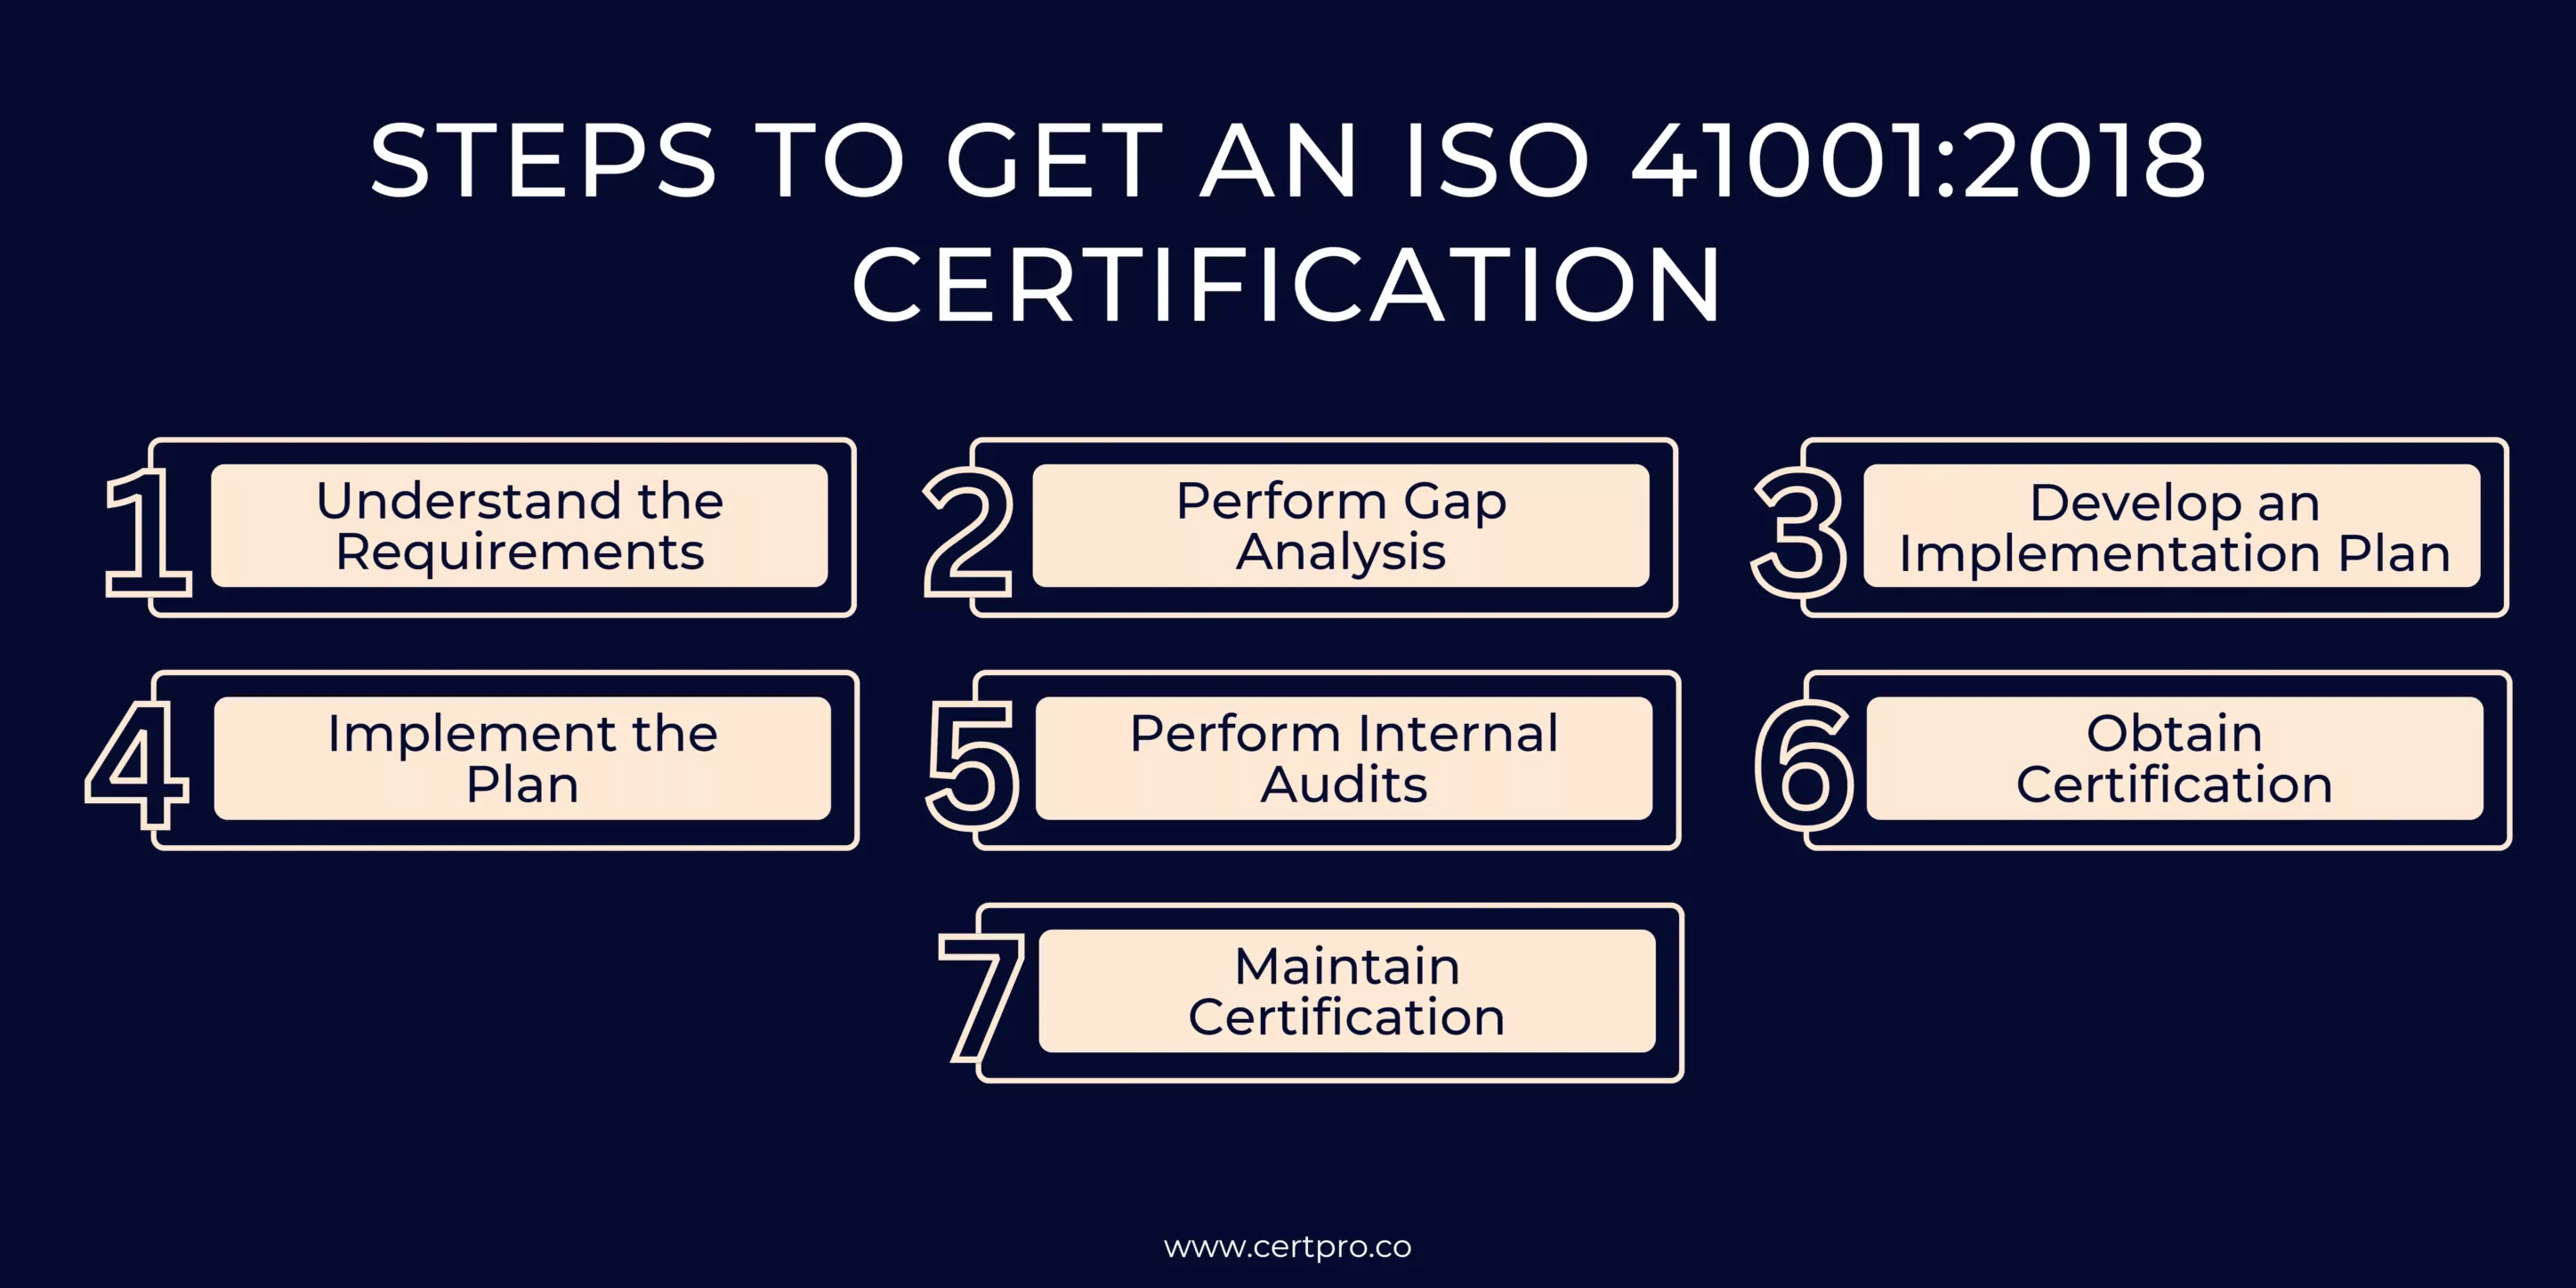 STEPS TO GET AN ISO 41001-2018